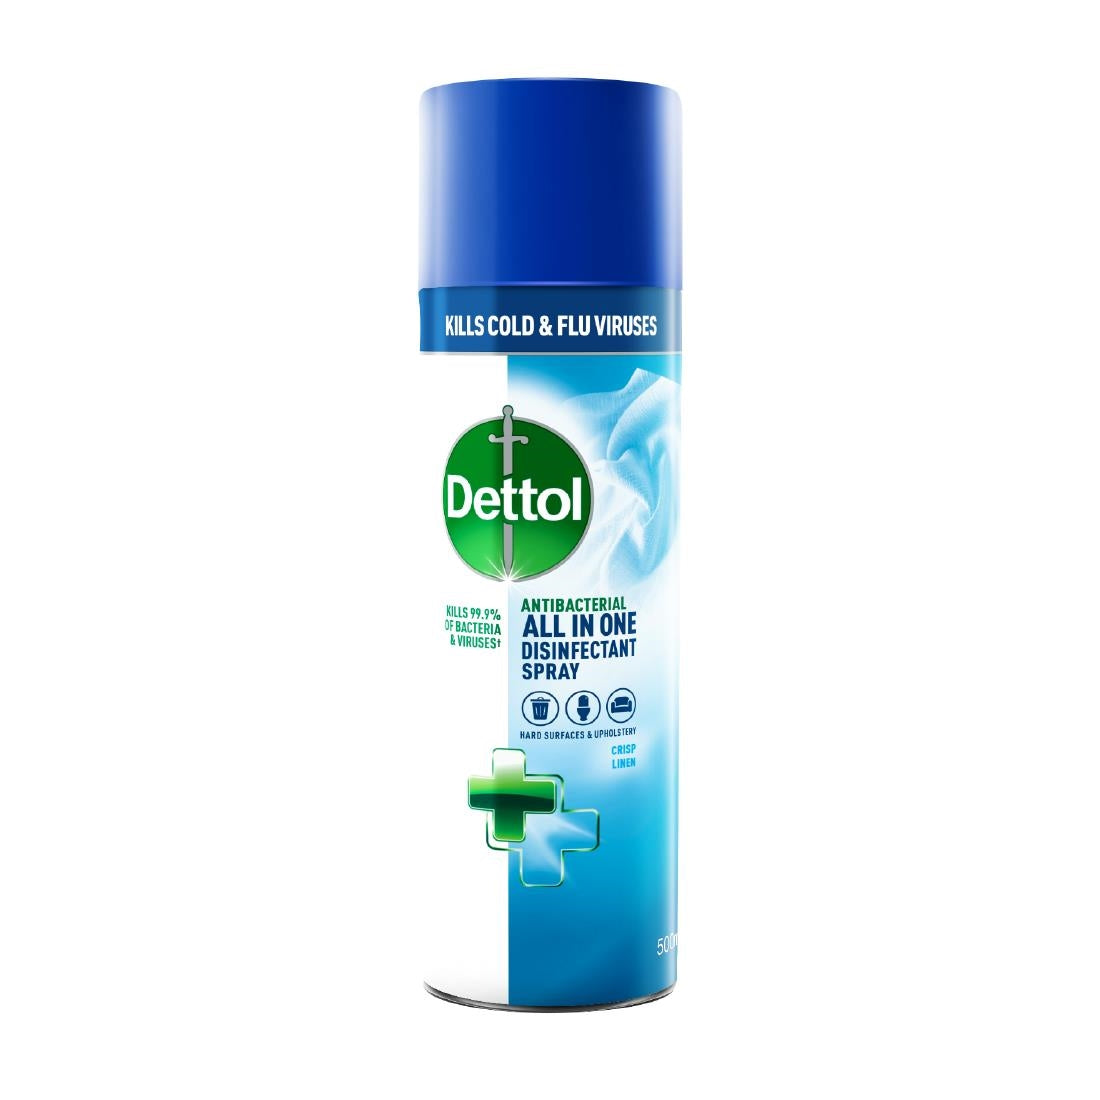 FT013 Dettol All-in-One Antibacterial Disinfectant Spray Ready To Use 500ml JD Catering Equipment Solutions Ltd